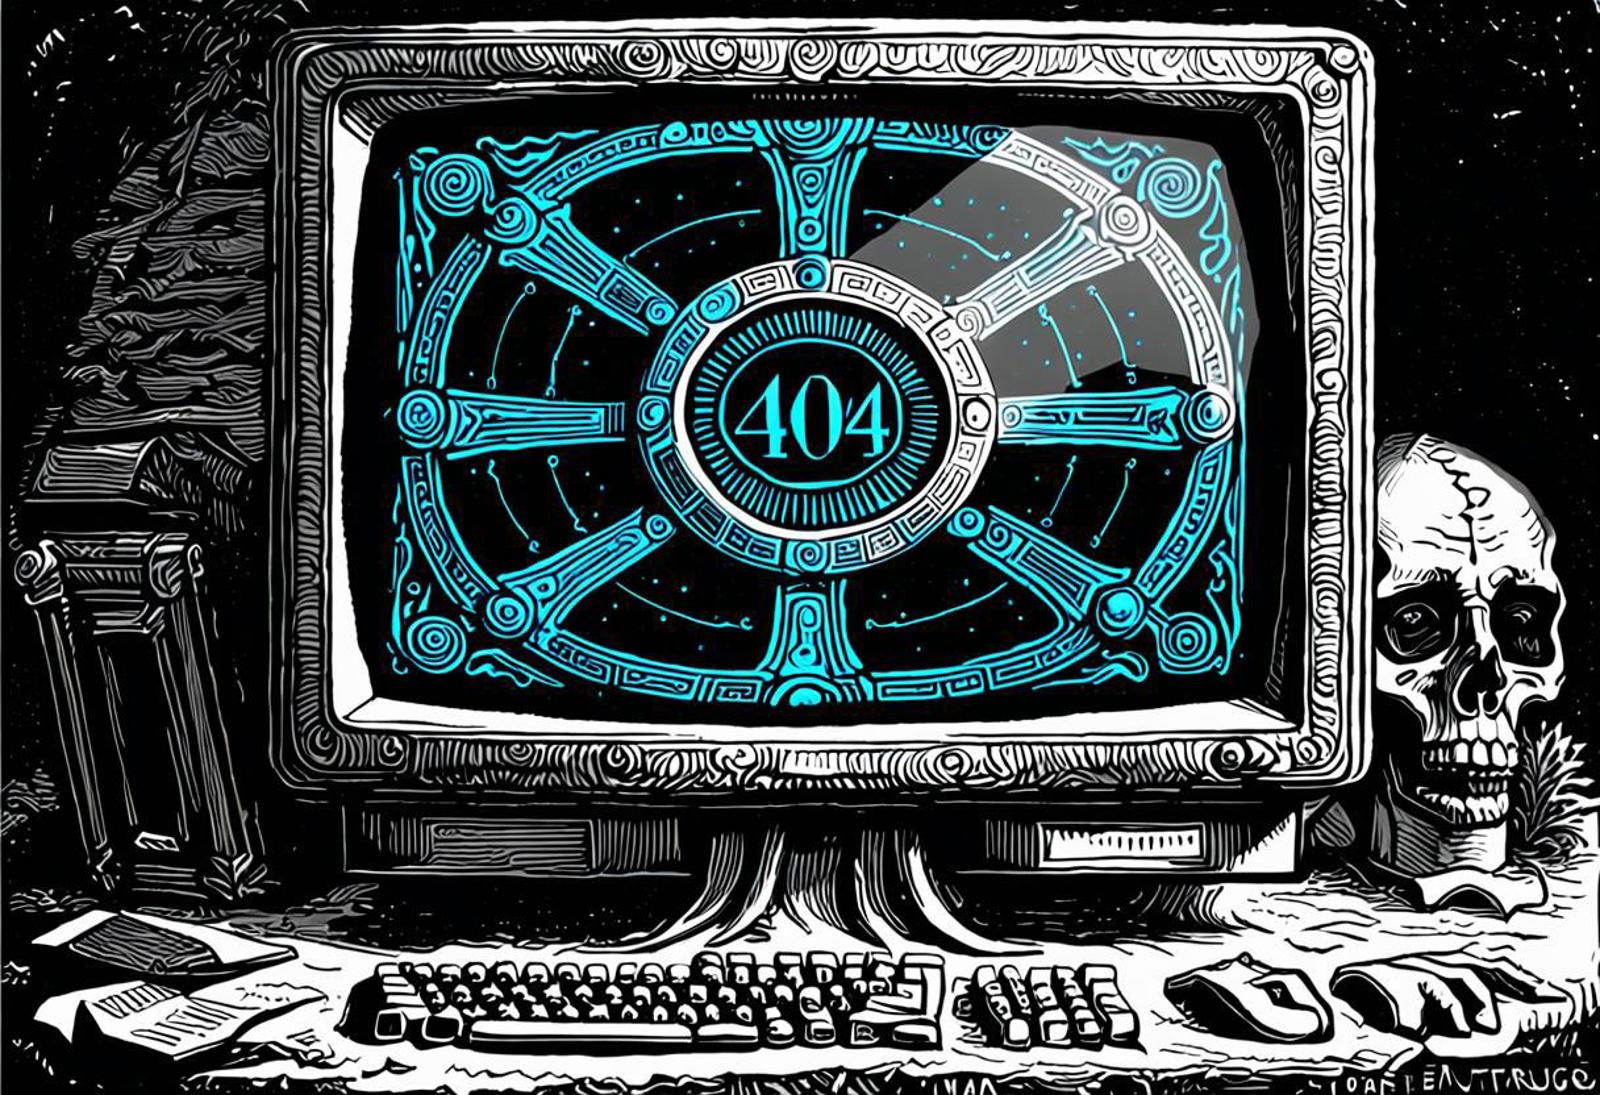 A computer monitor displaying the number 404 on a blue background.